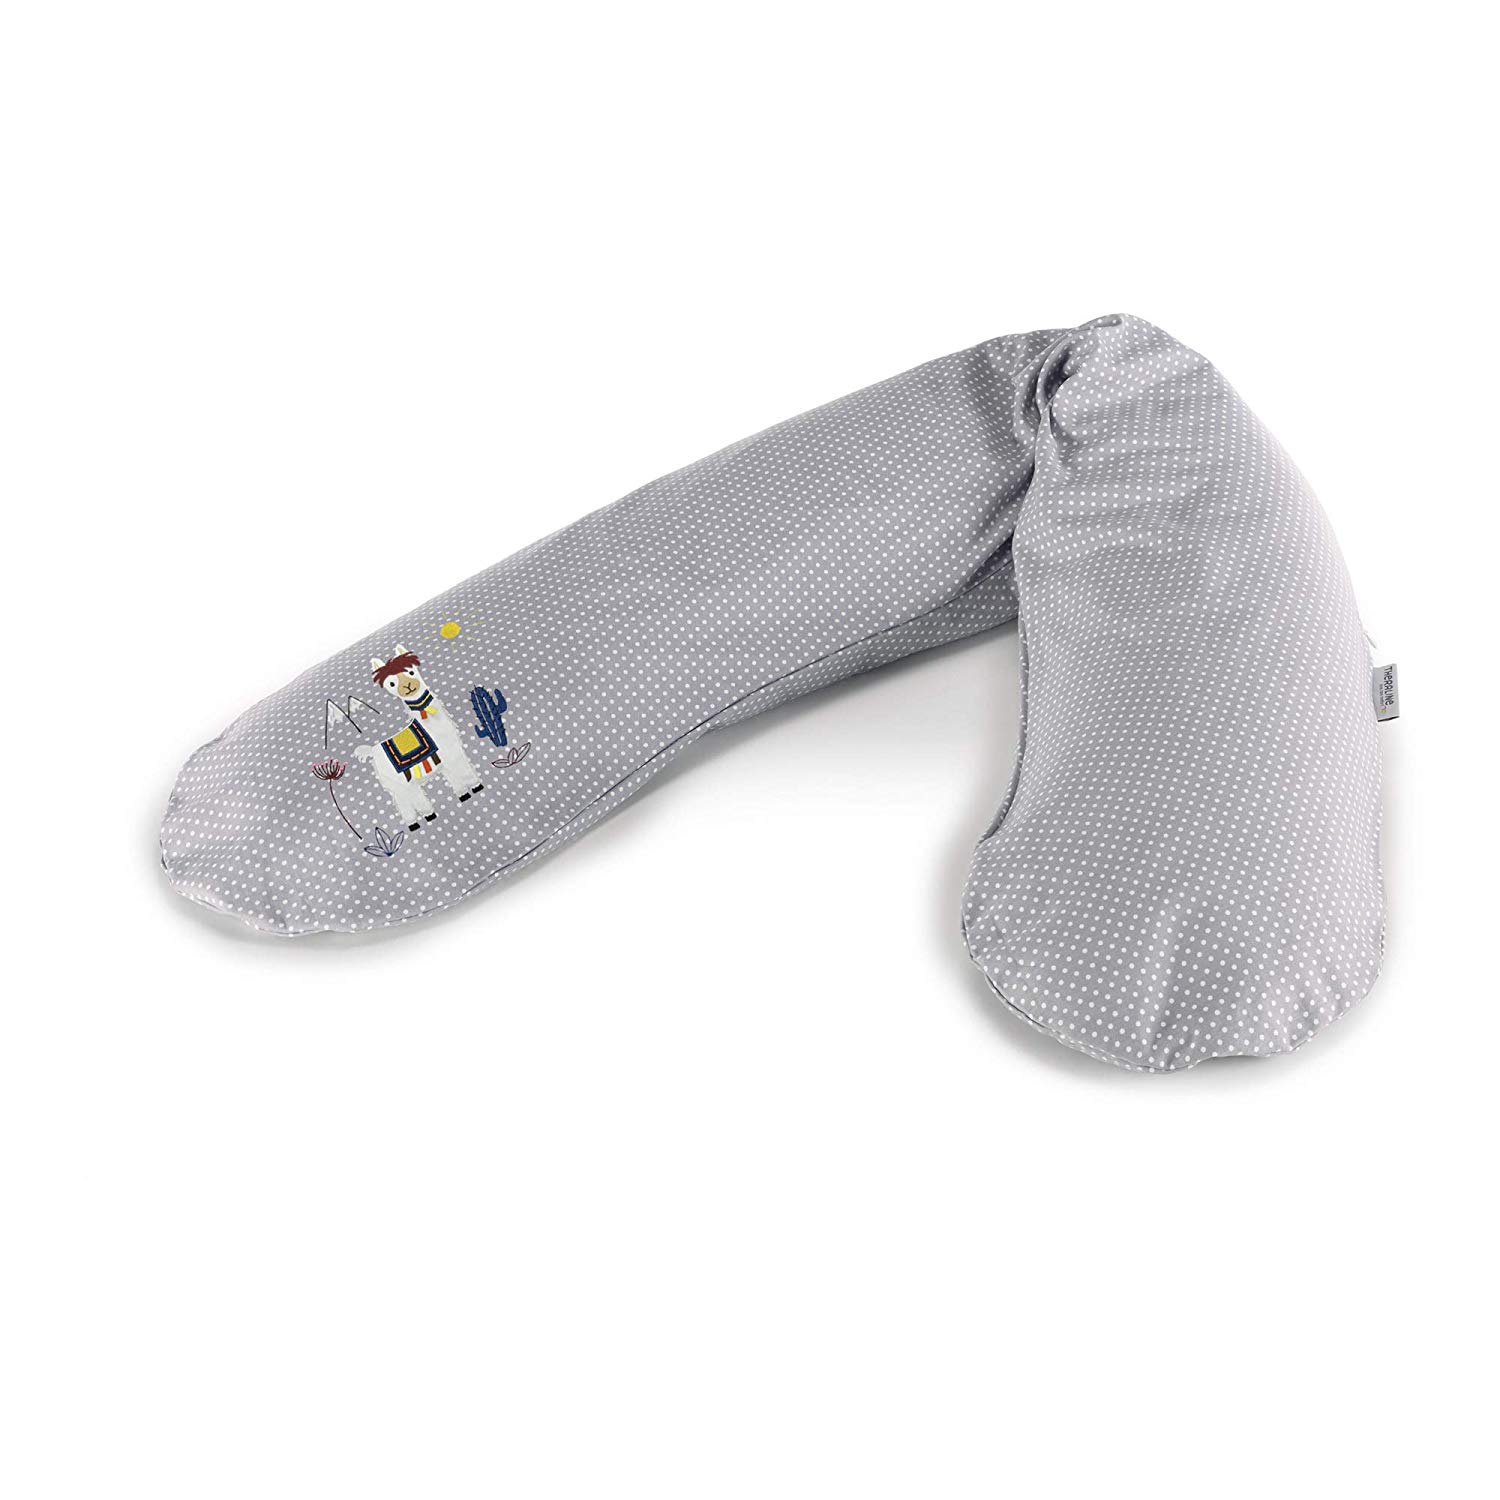 The Original Theraline Pregnancy and Breastfeeding Pillow Filled with Sand-Like Original Micro-Beads - Comes with Outer Cover,190 cm